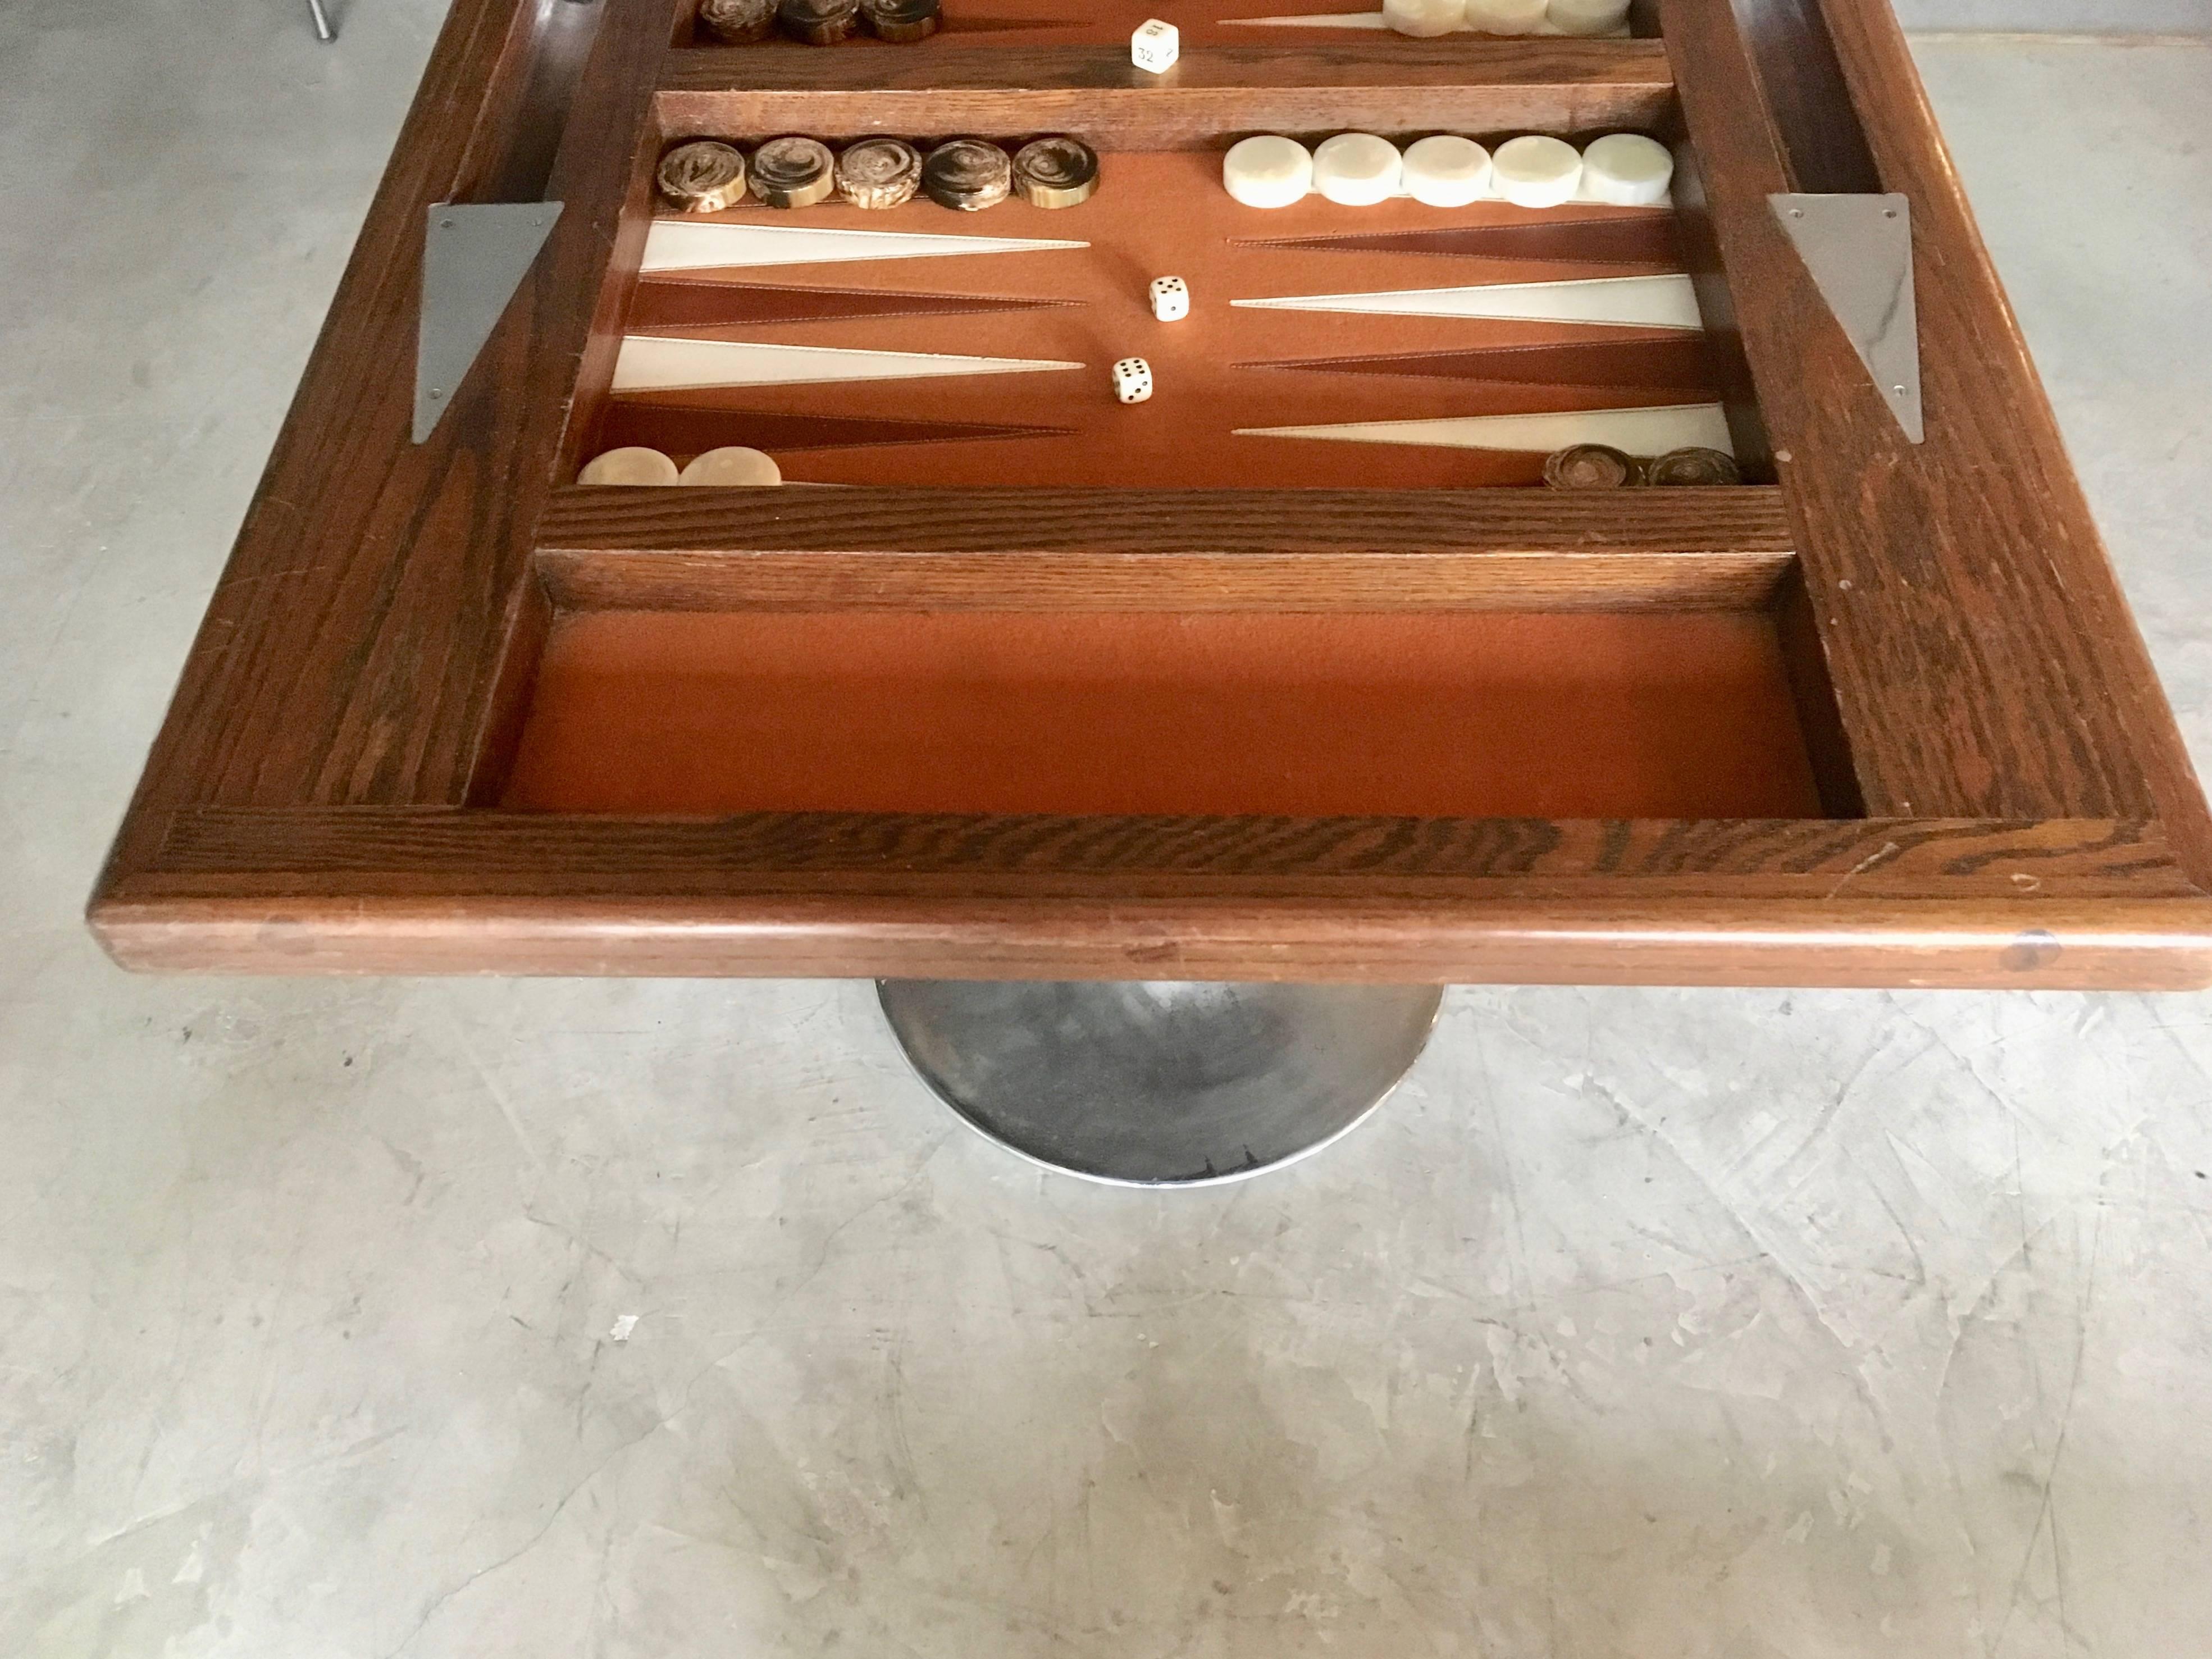 Great vintage wood backgammon table. Felt top with leather triangles. Vintage bakelite backgammon pieces included. Tulip base allows to place any time of chair underneath. Large size tabletop. Good vintage condition.